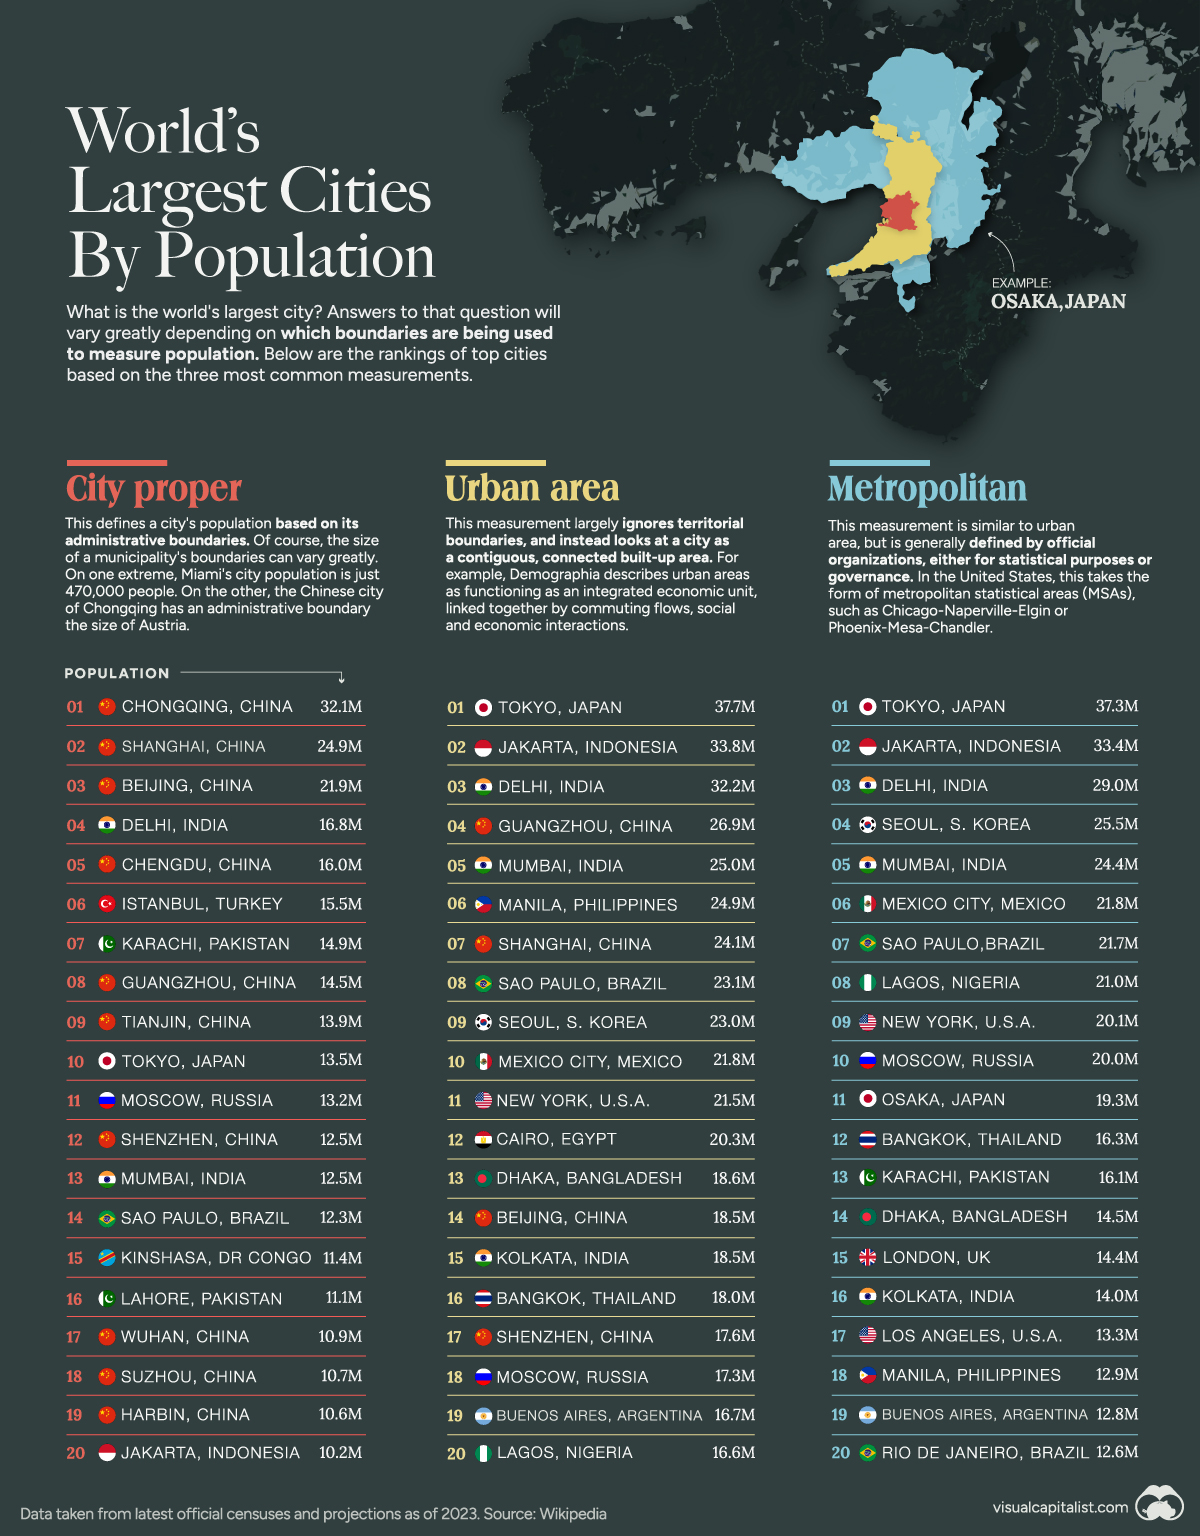 Ranked: The World's Largest Cities By Population